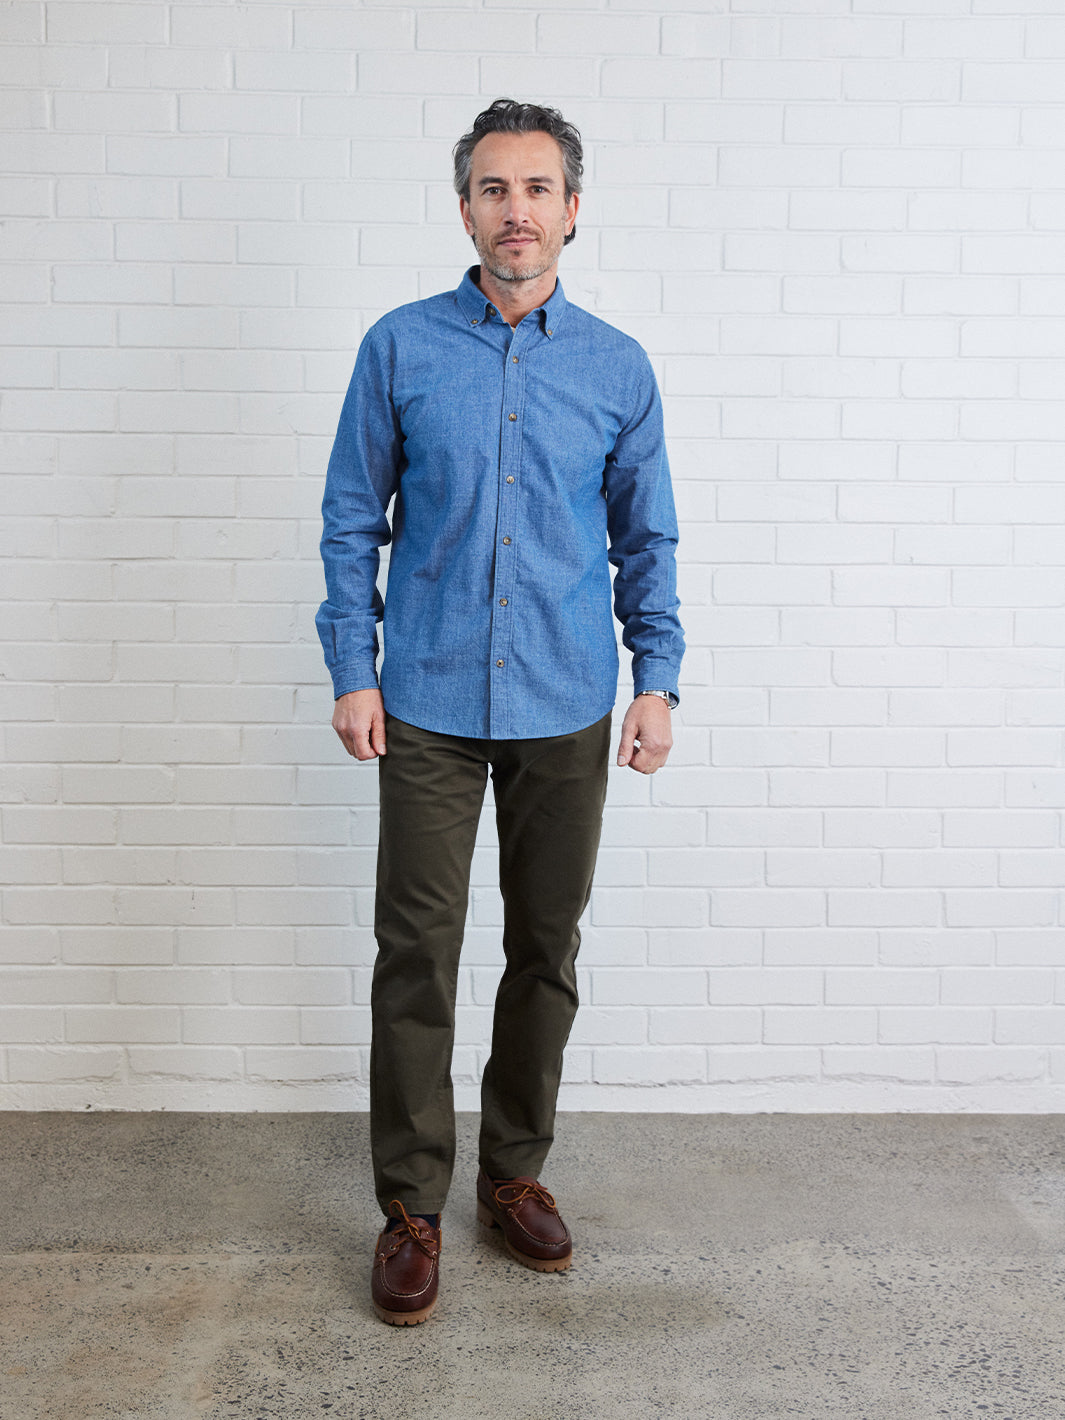 Model wearing denim button down with khaki chinos and brown boat shoes